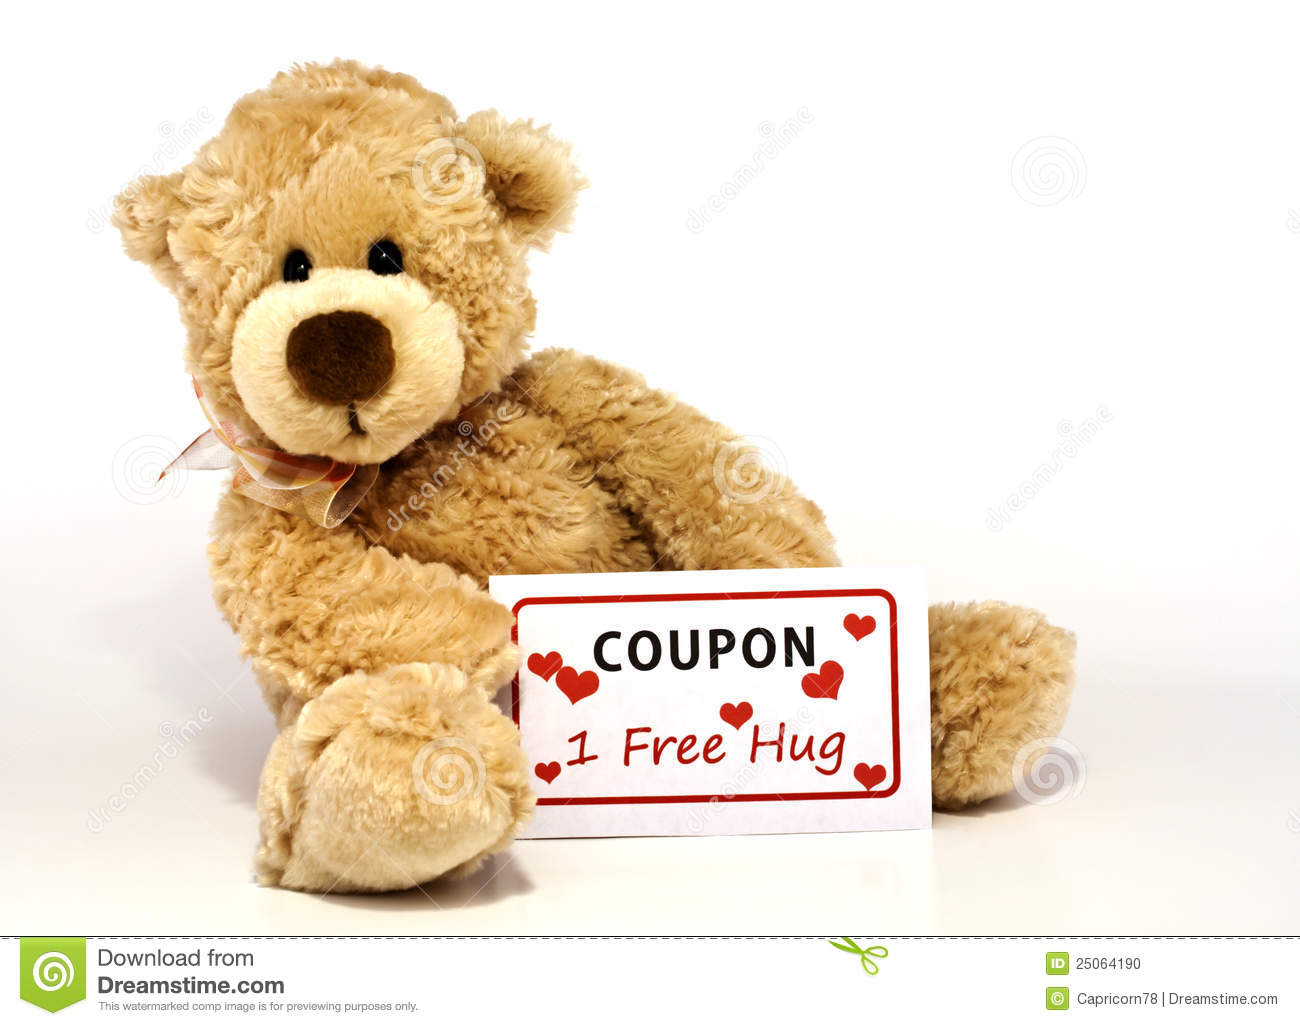 Holding A Coupon For One Free Hug On White Background With Copy Space